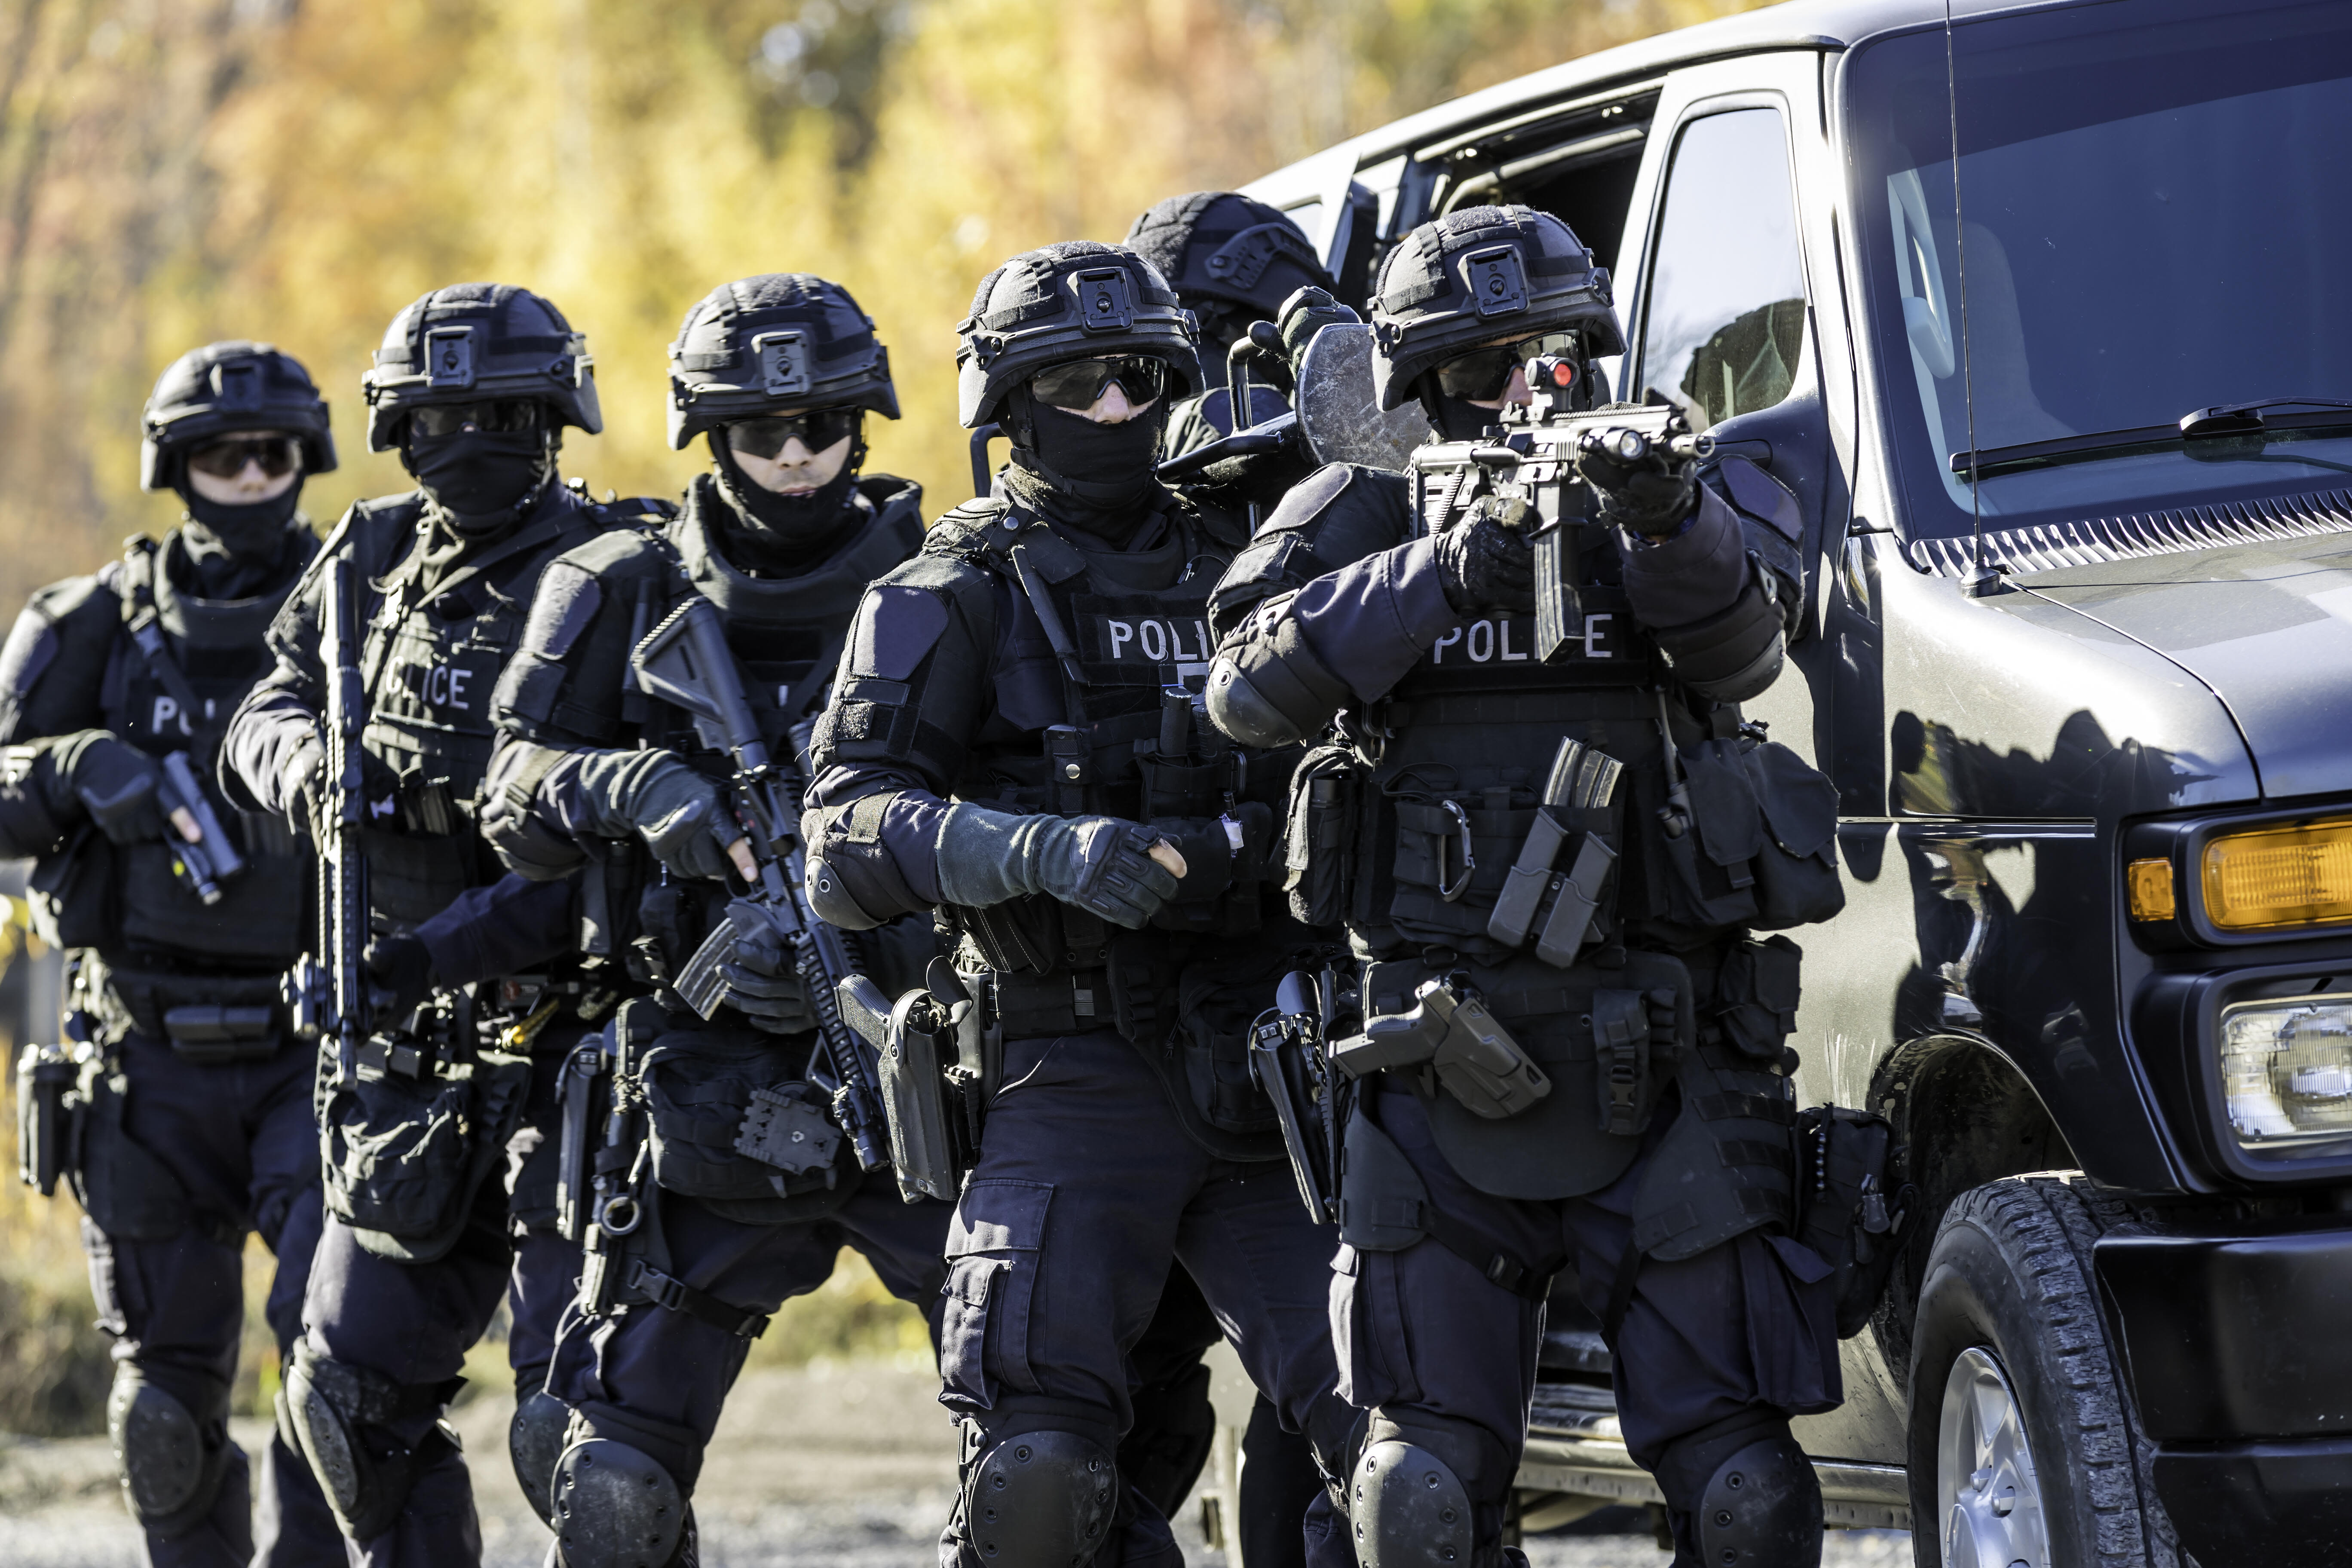 Ohio SWAT Team Has Been Using Counterfeit Body Armor Imported From China | iHeart